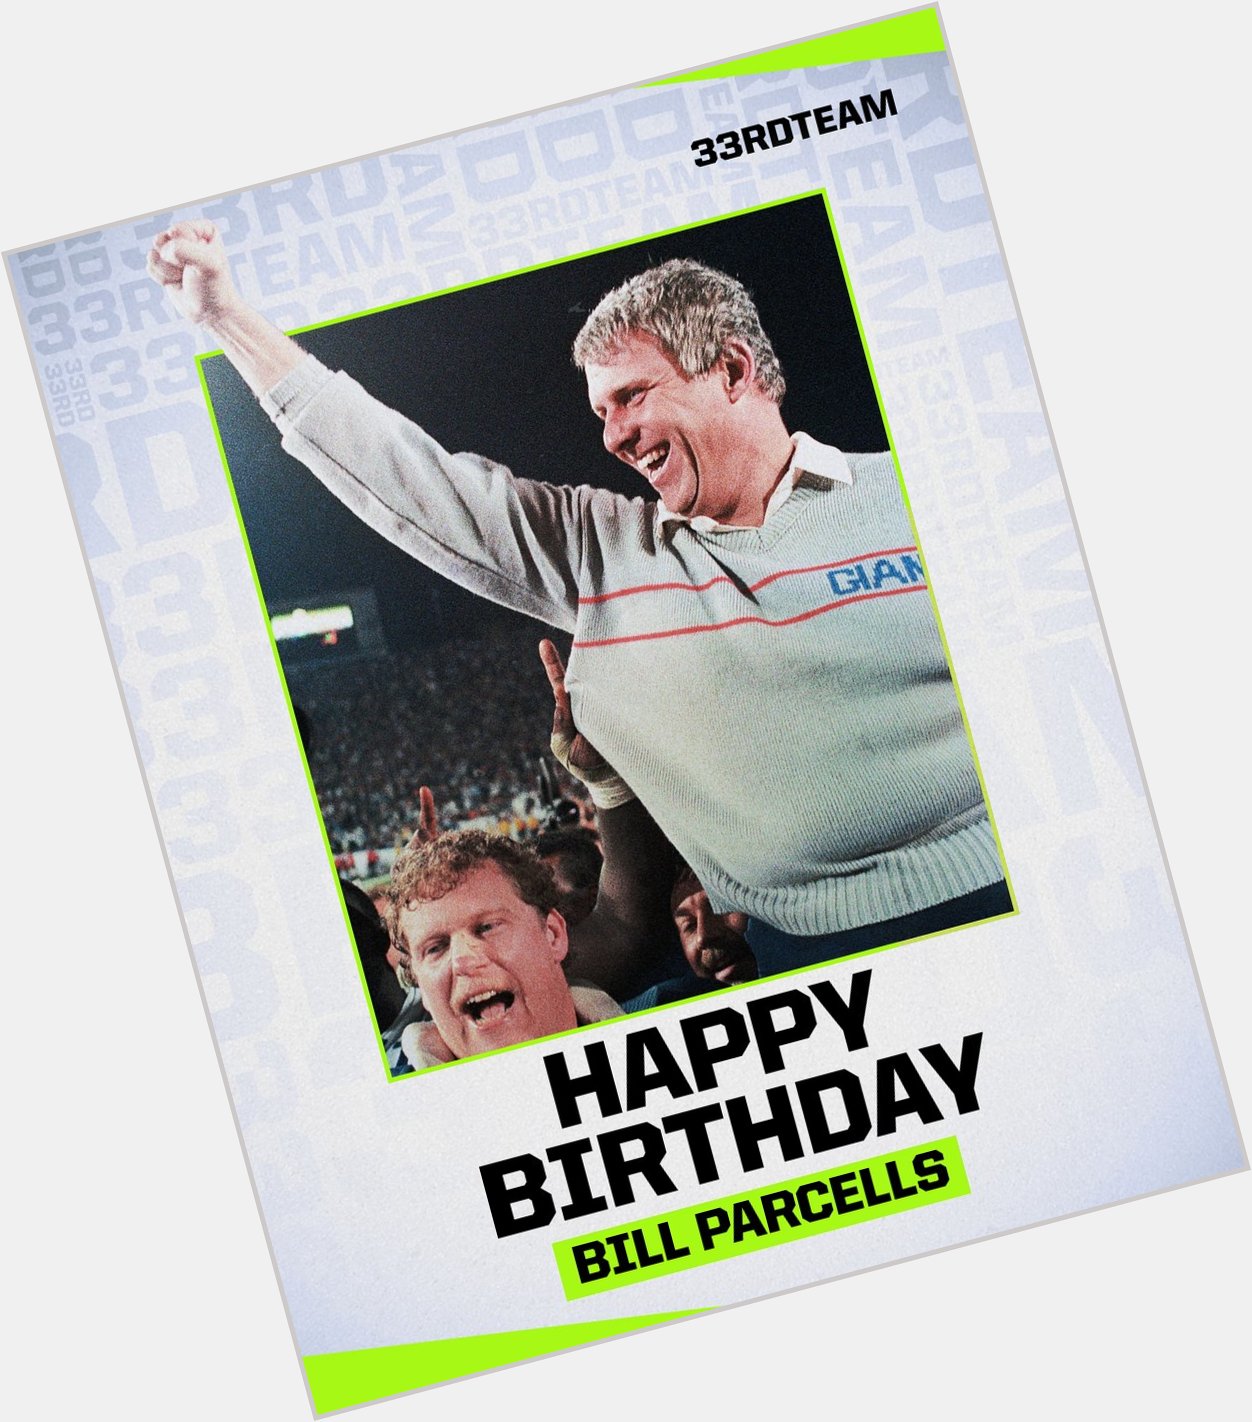 Happy birthday to one of the greatest coaches ever and a member of The 33rd Team, Bill Parcells! 